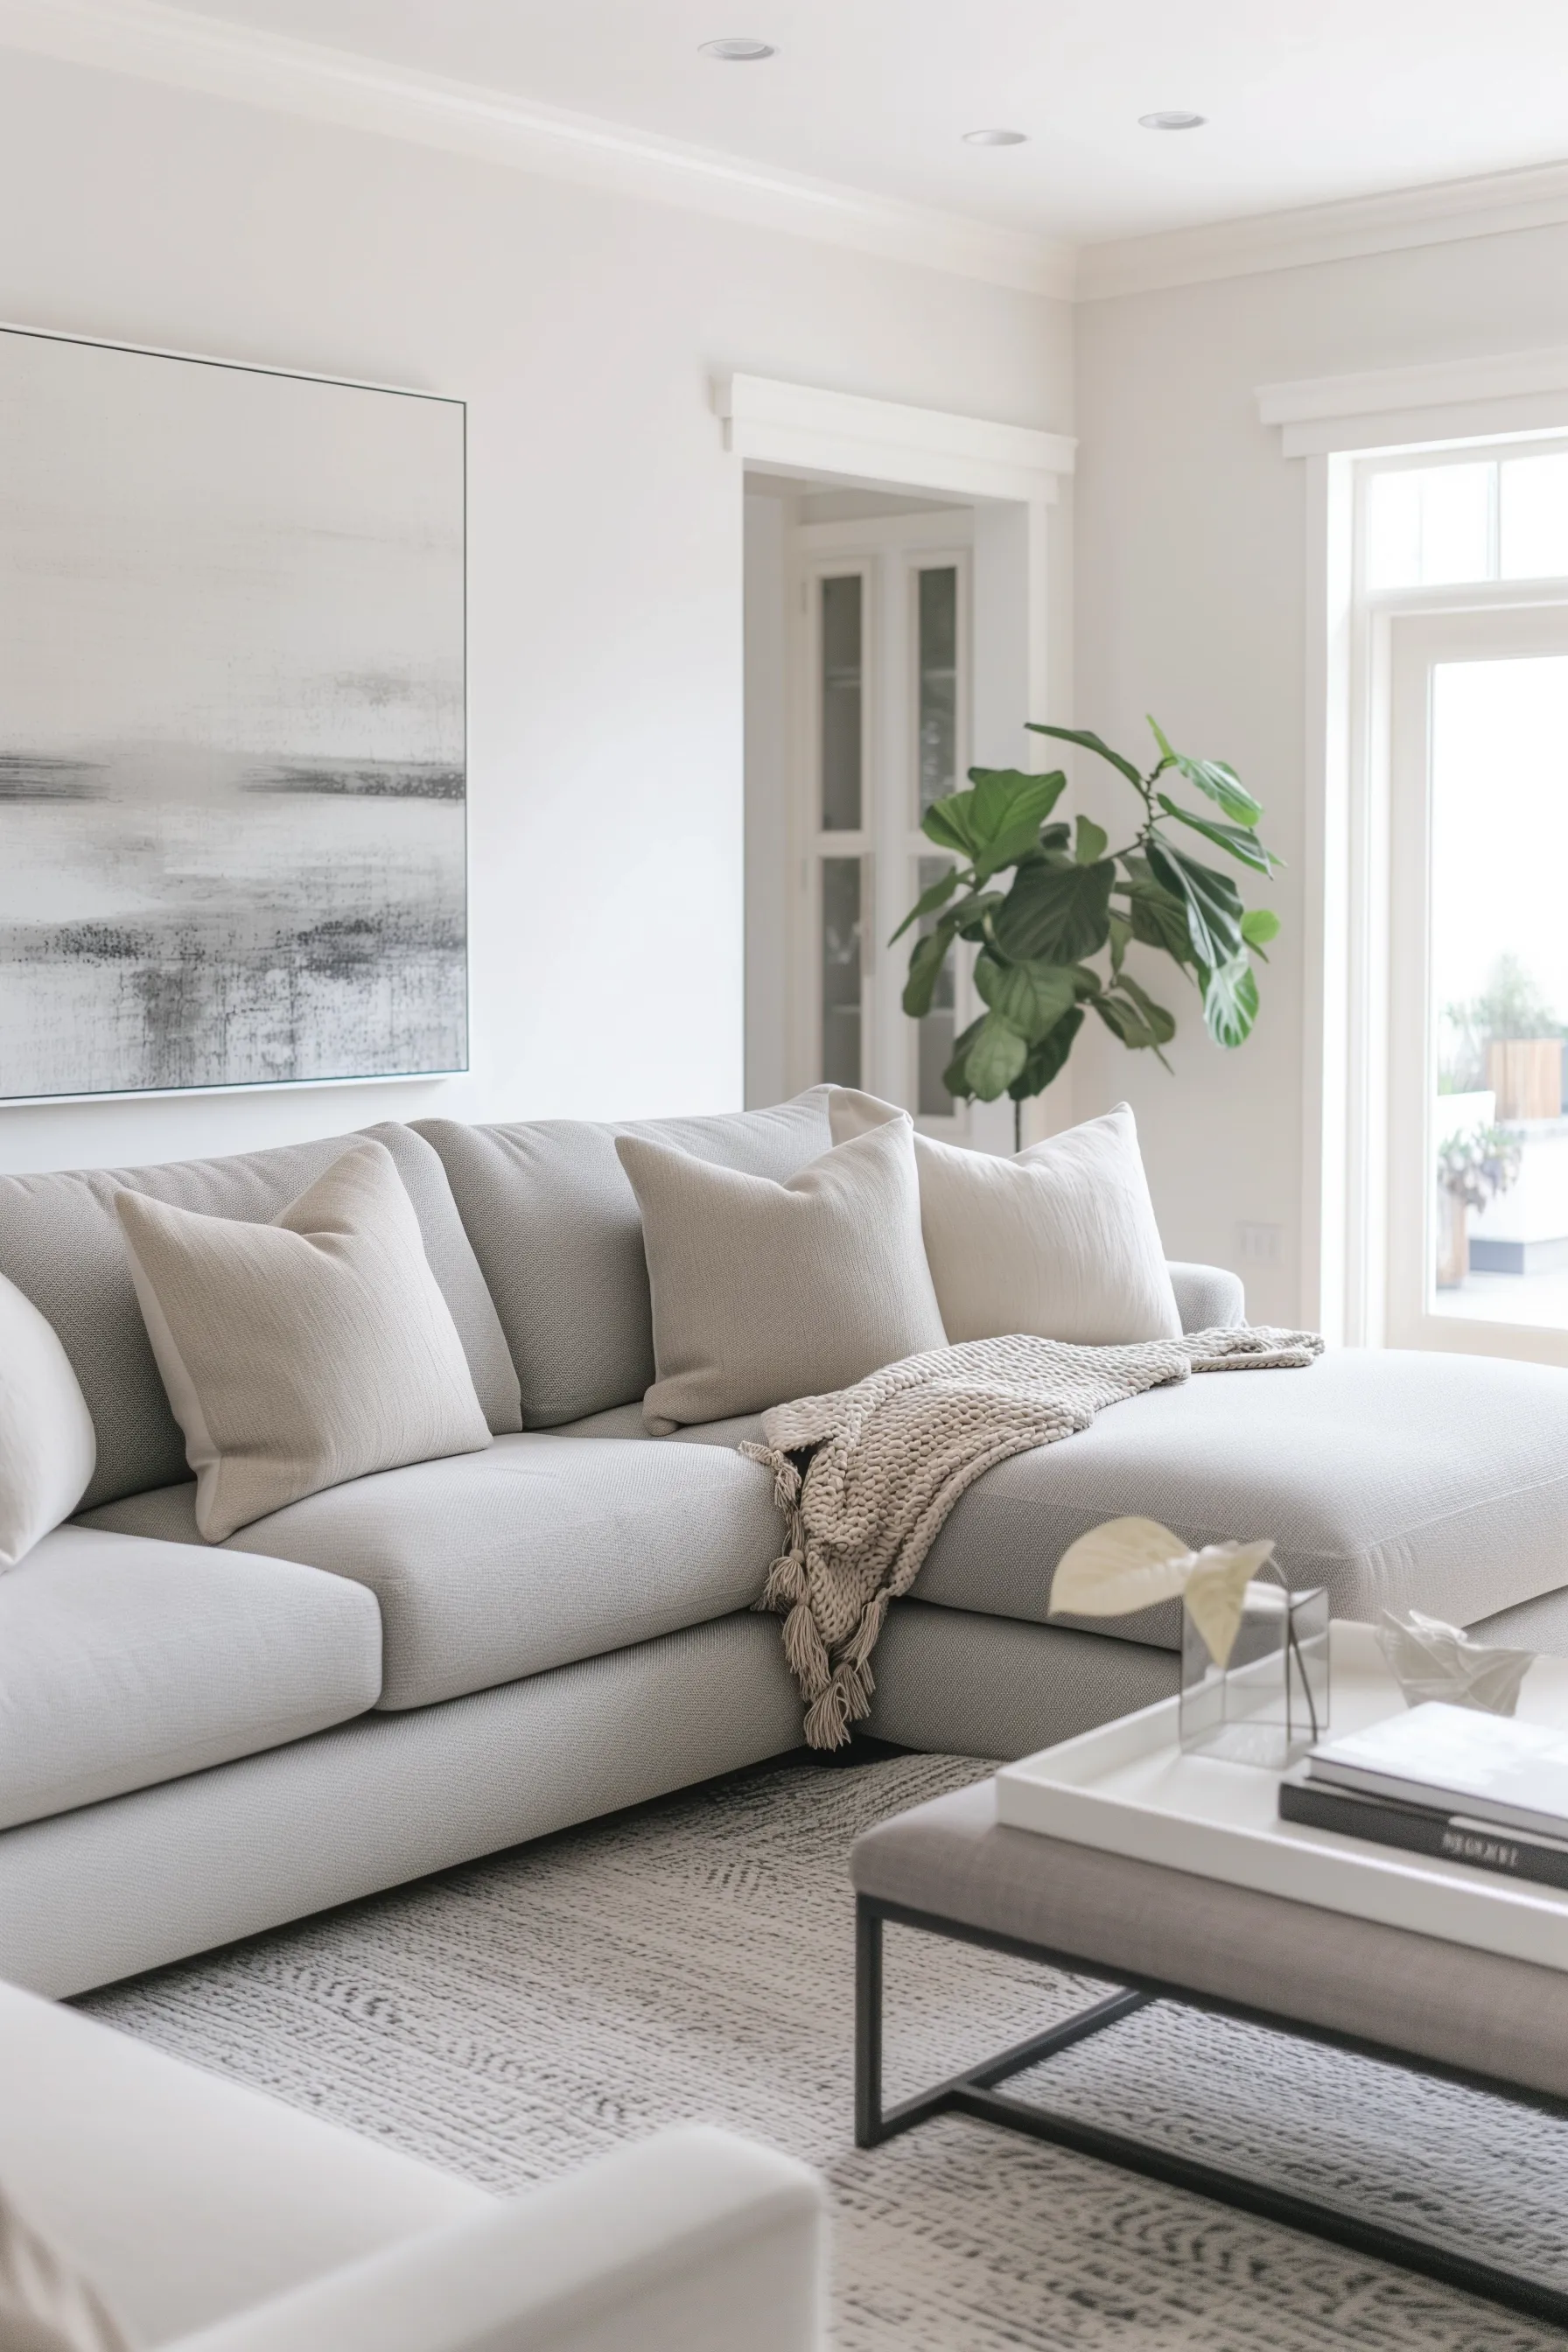 A grey sofa in a living room with neutral colors and a green plant